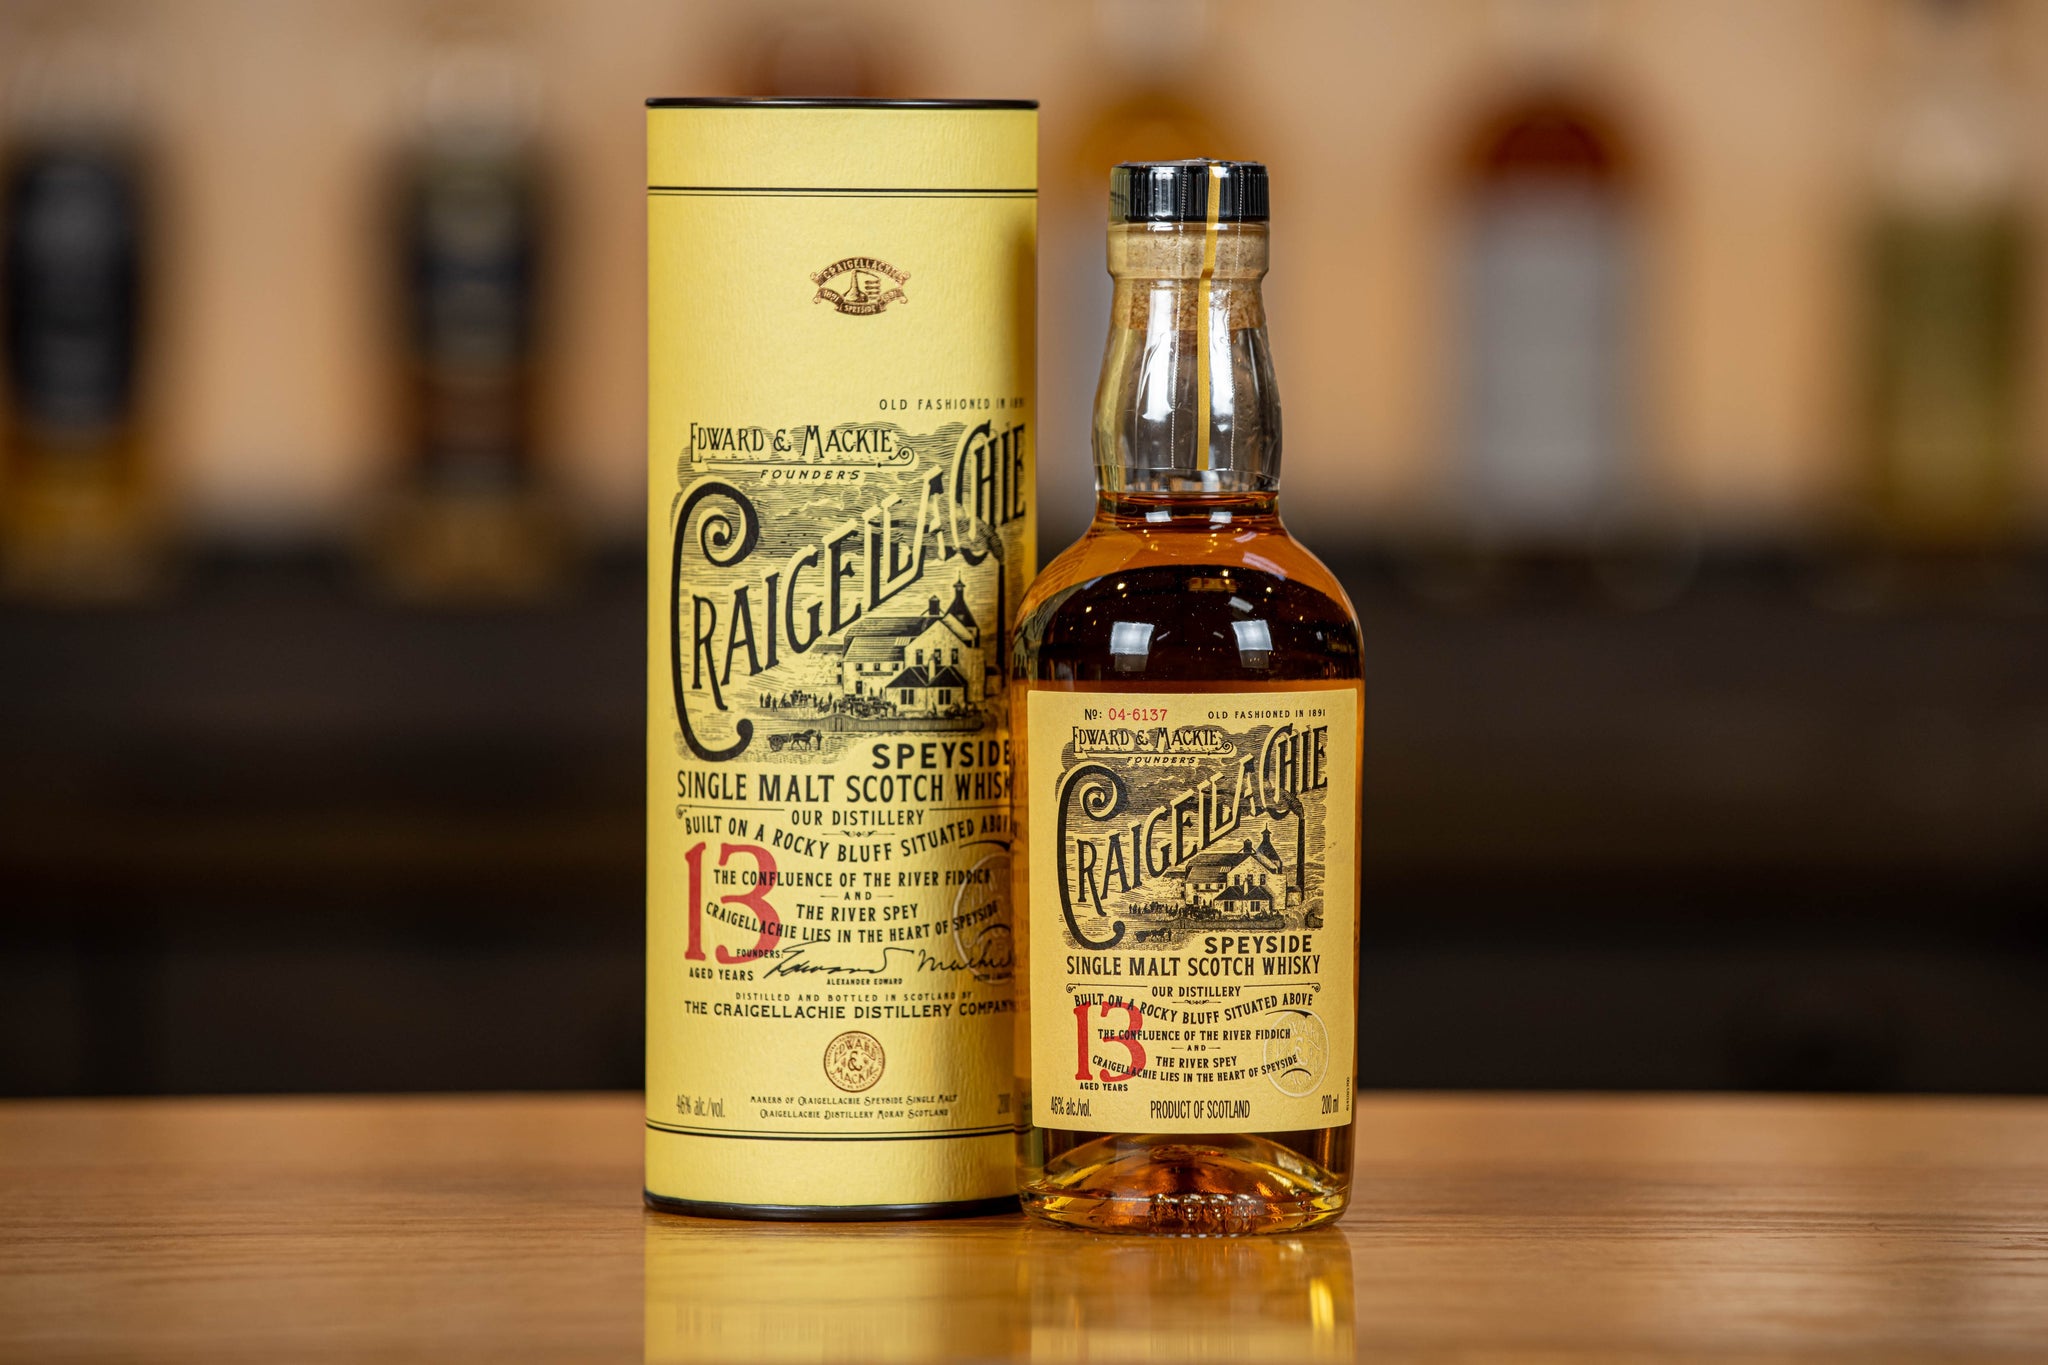 Craigellachie 13 Year Old Whisky 20cl